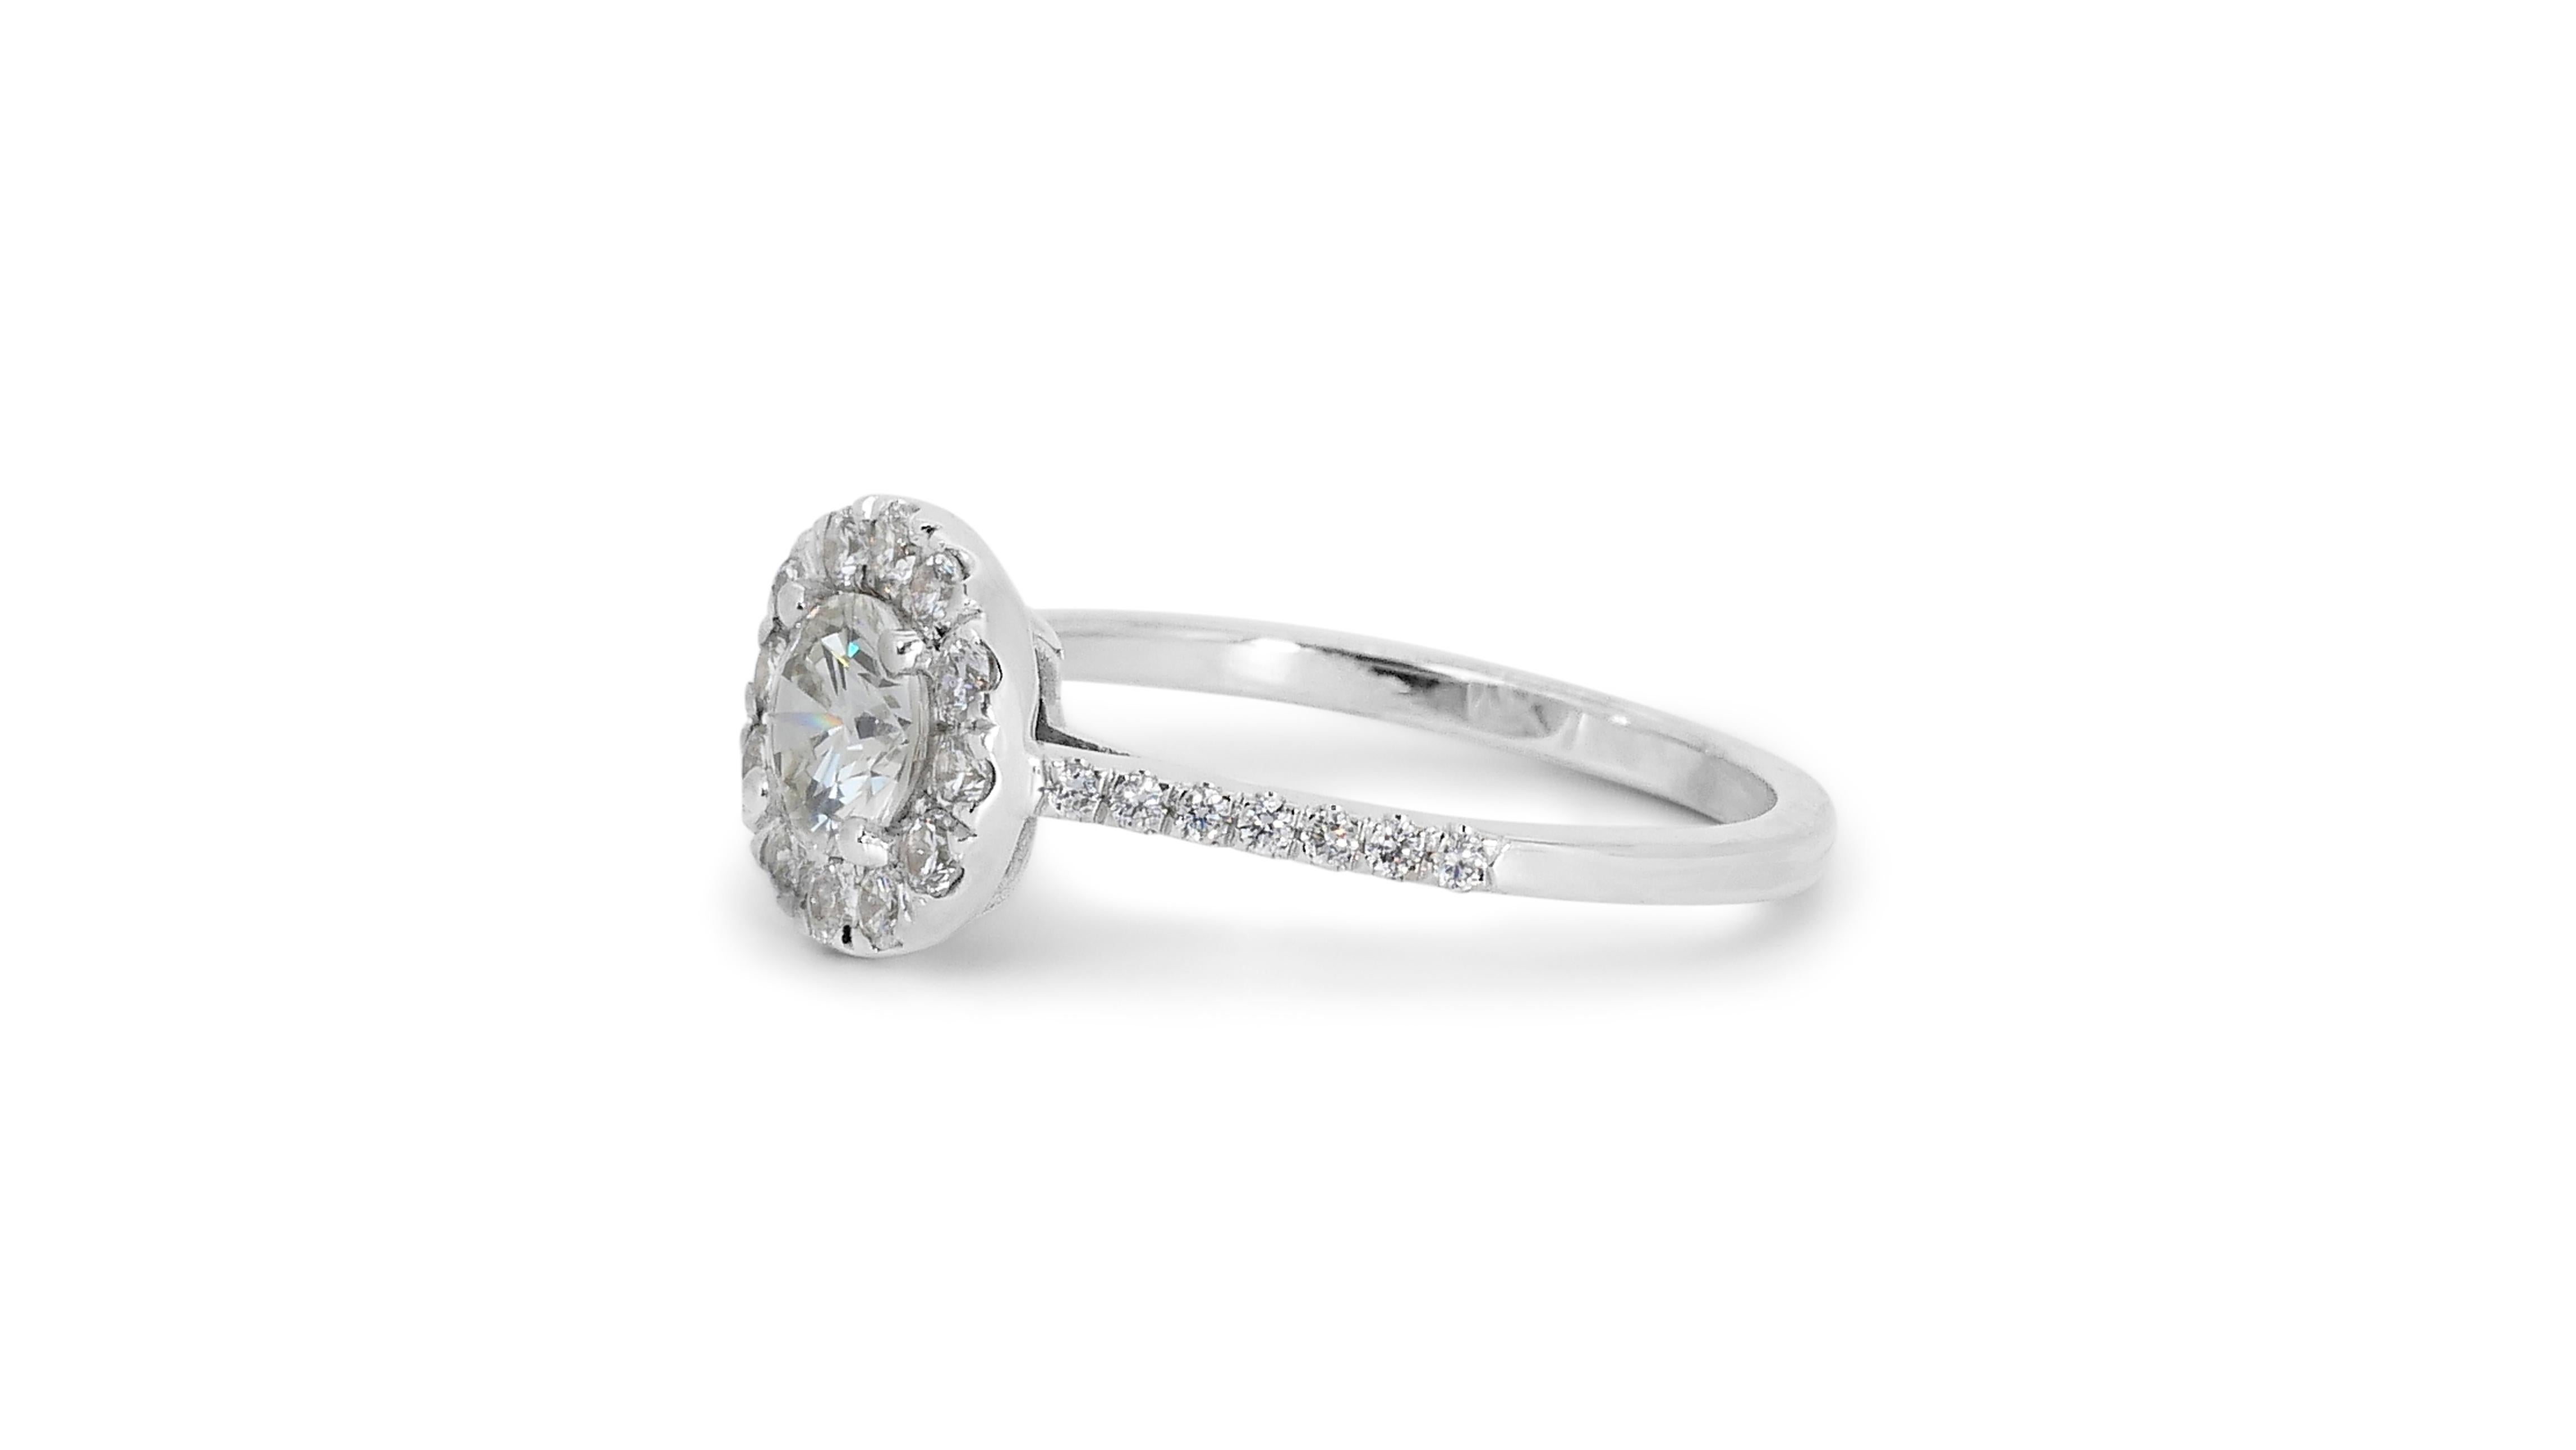 Glamorous 1.30ct Diamonds Halo Ring in 18k White Gold - GIA Certified In New Condition For Sale In רמת גן, IL